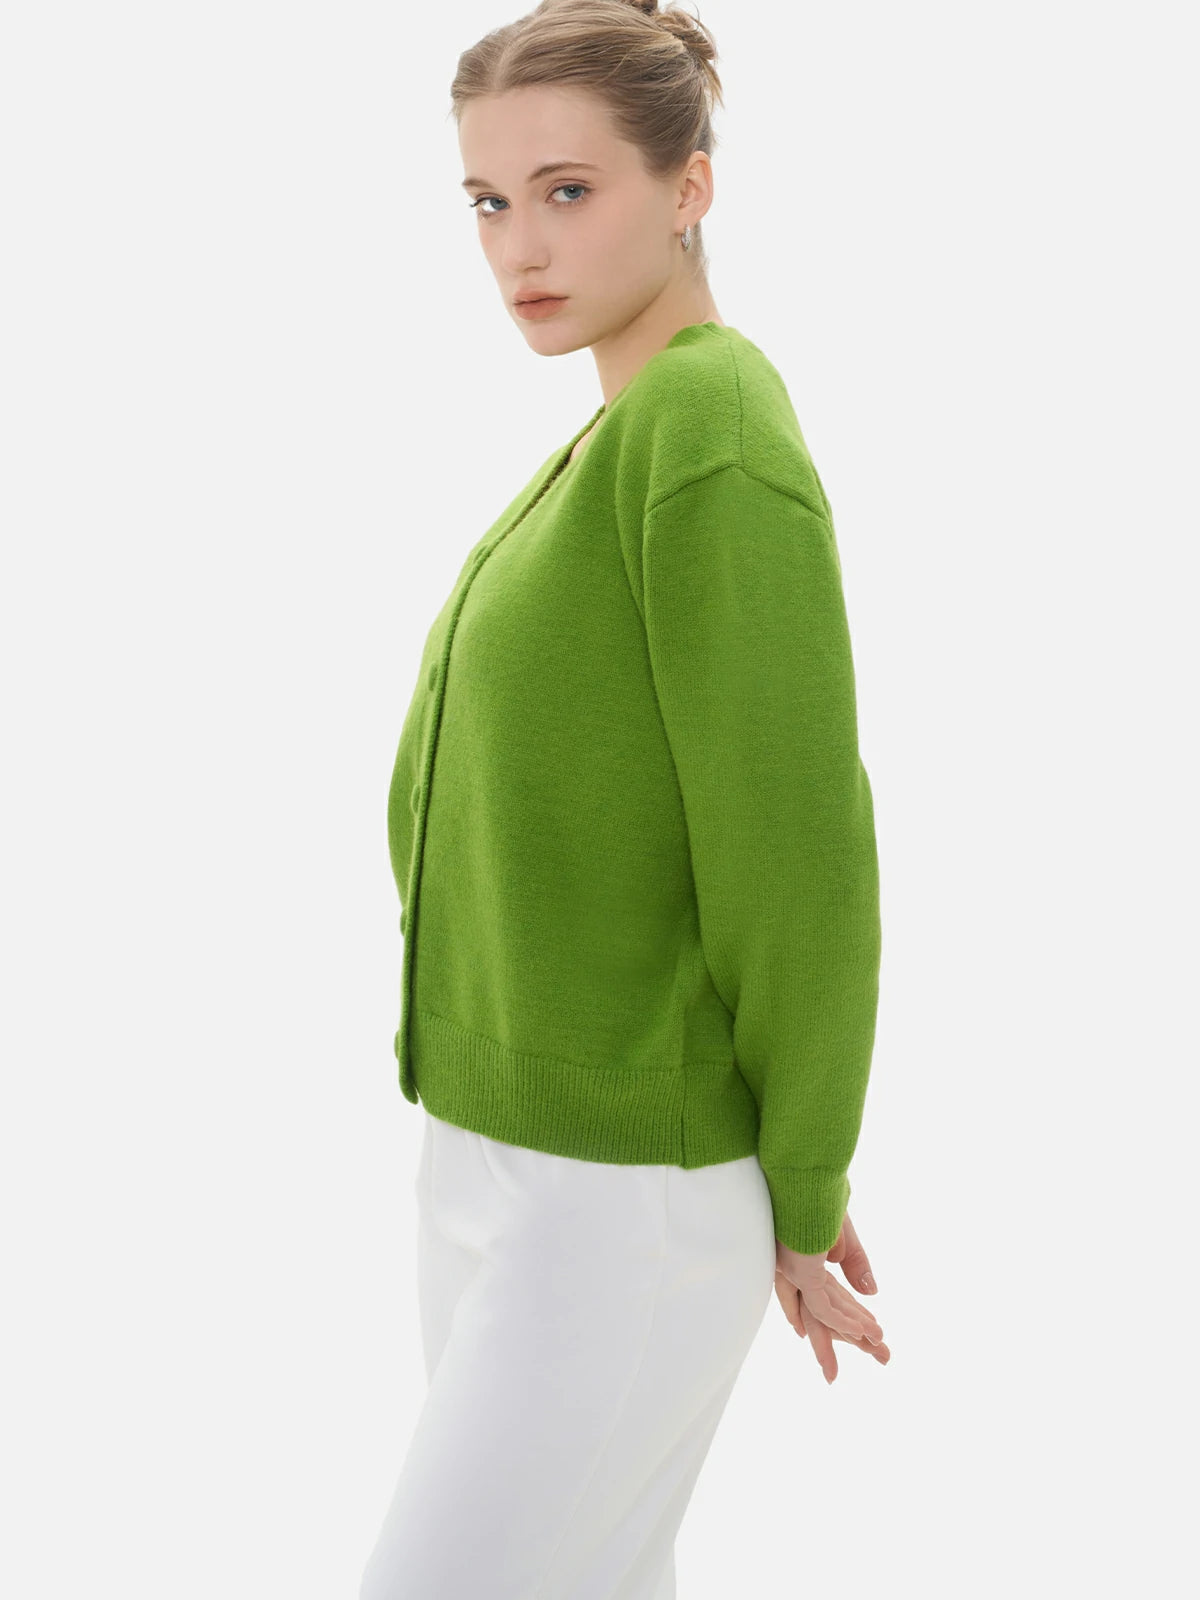 Warm and soft material in a stylish green cardigan outerwear.